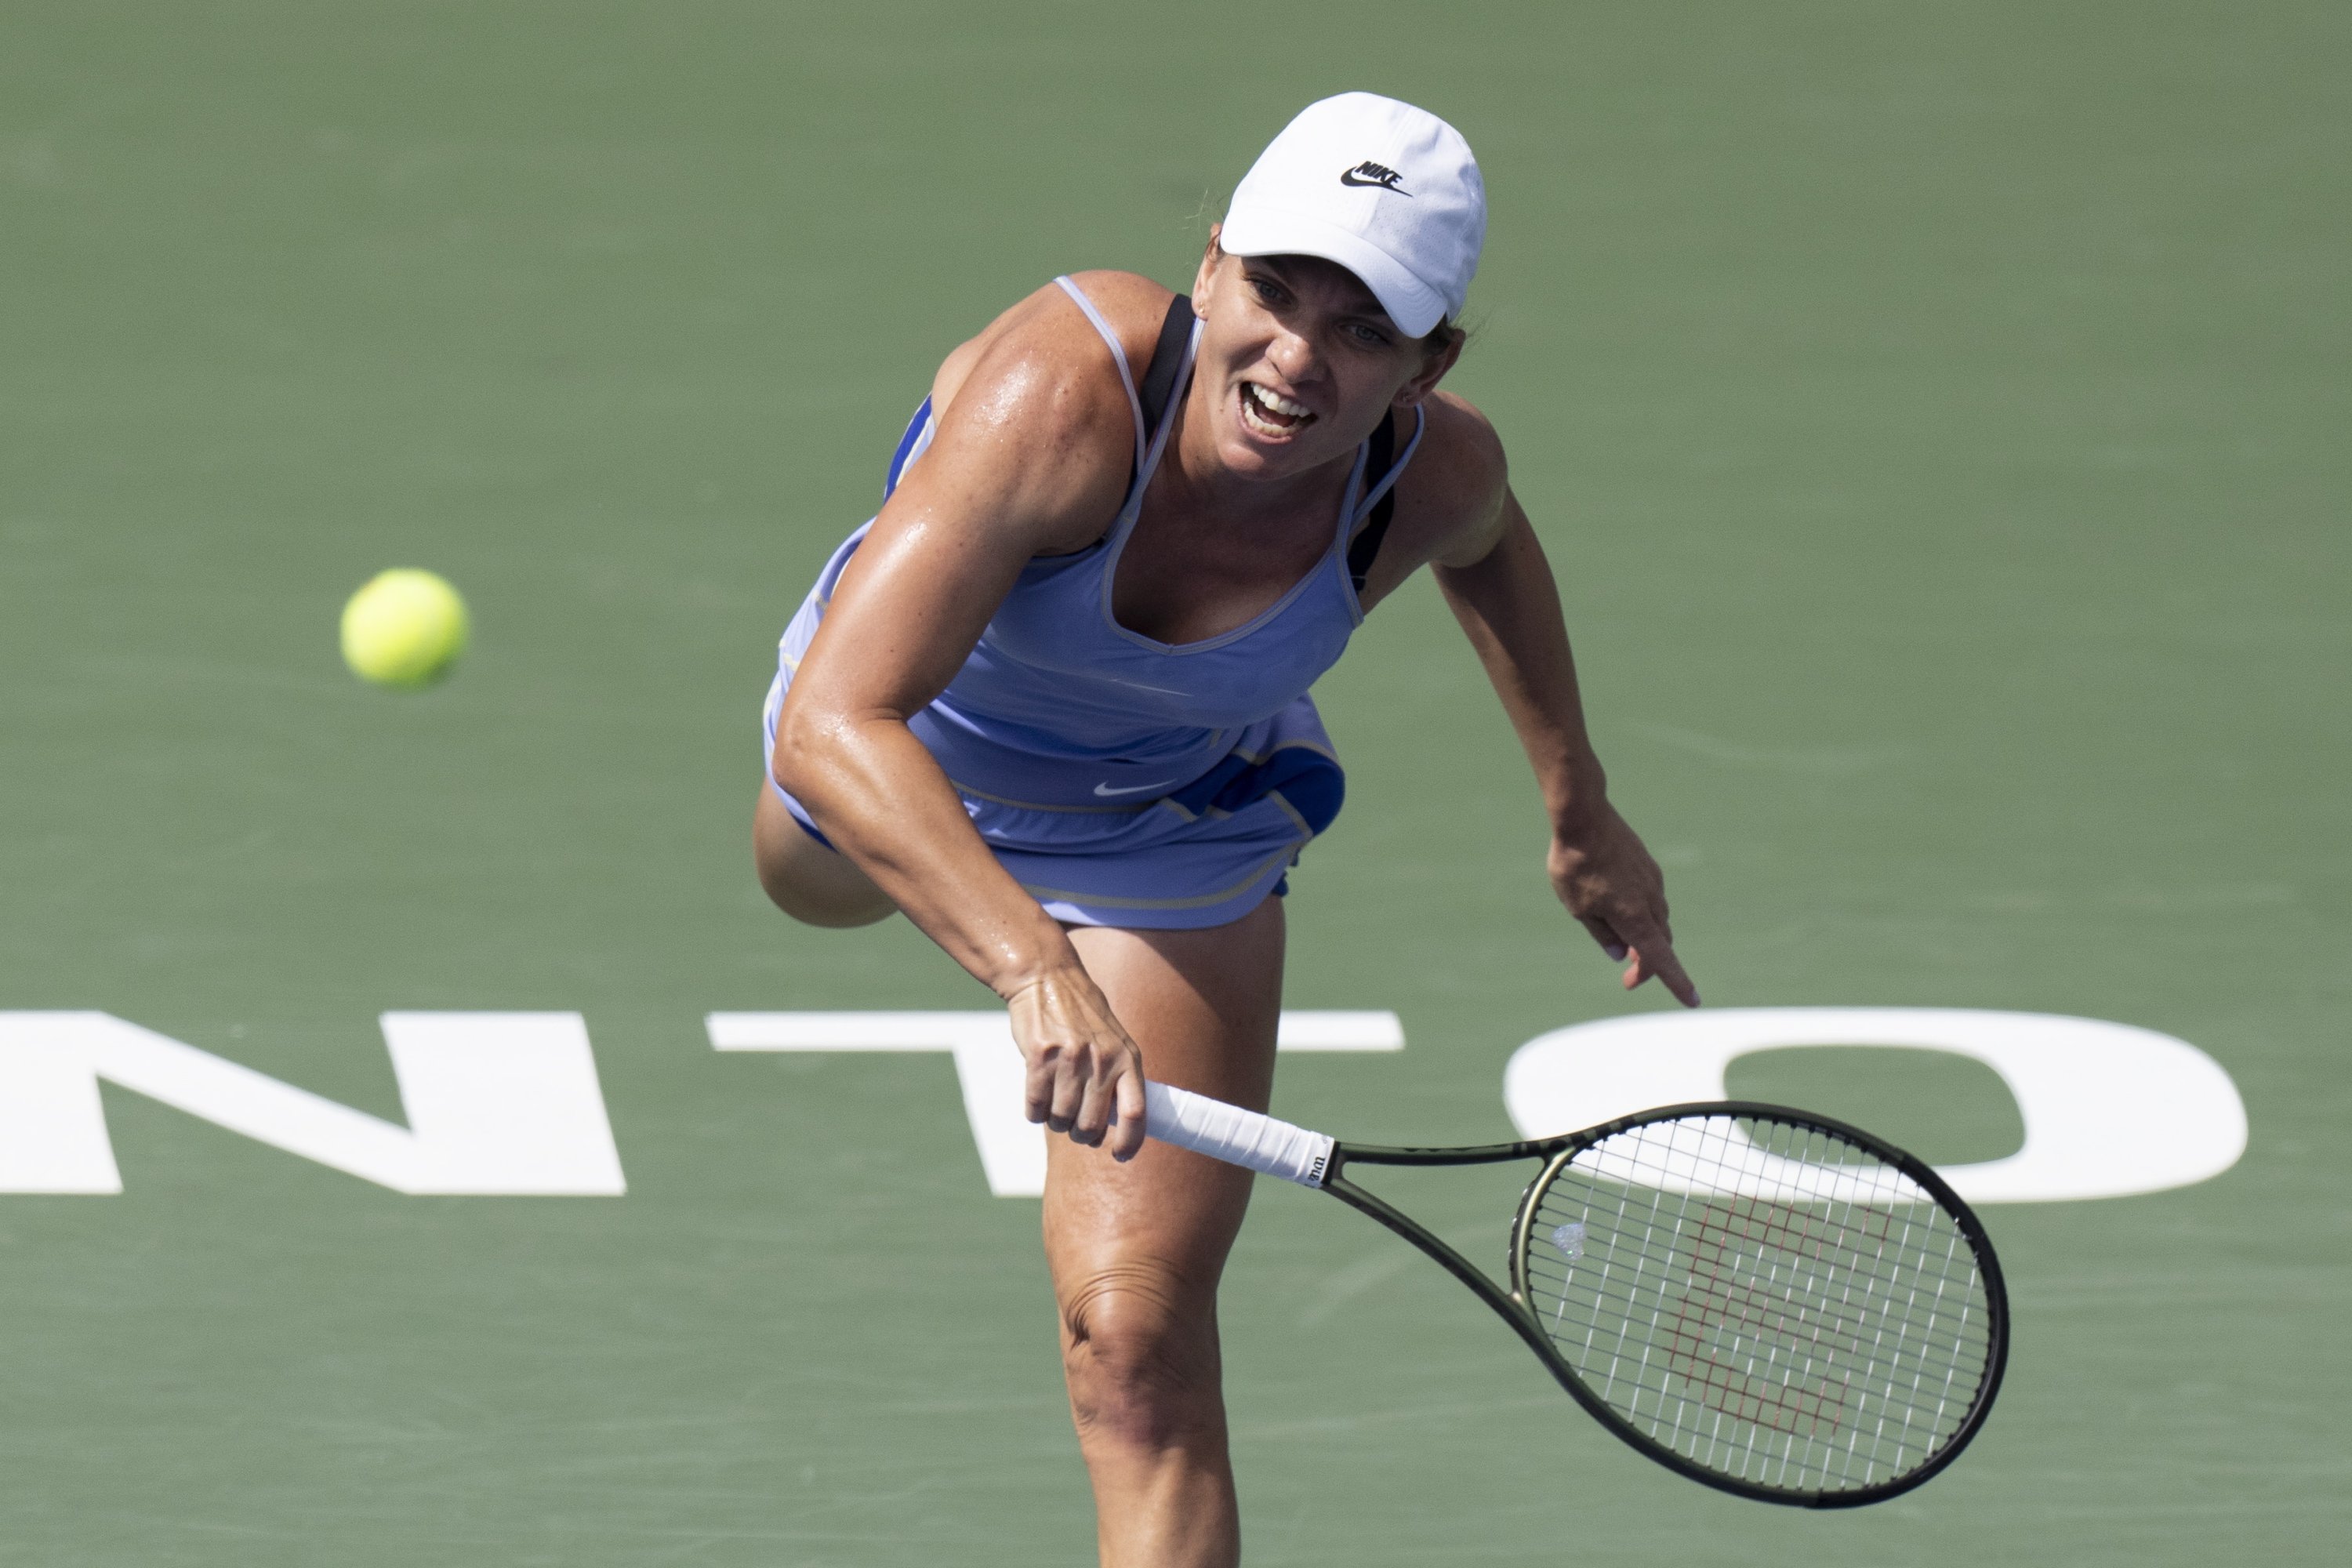 Busta lifts maiden Masters 1000 title, Halep claims Canadian Open